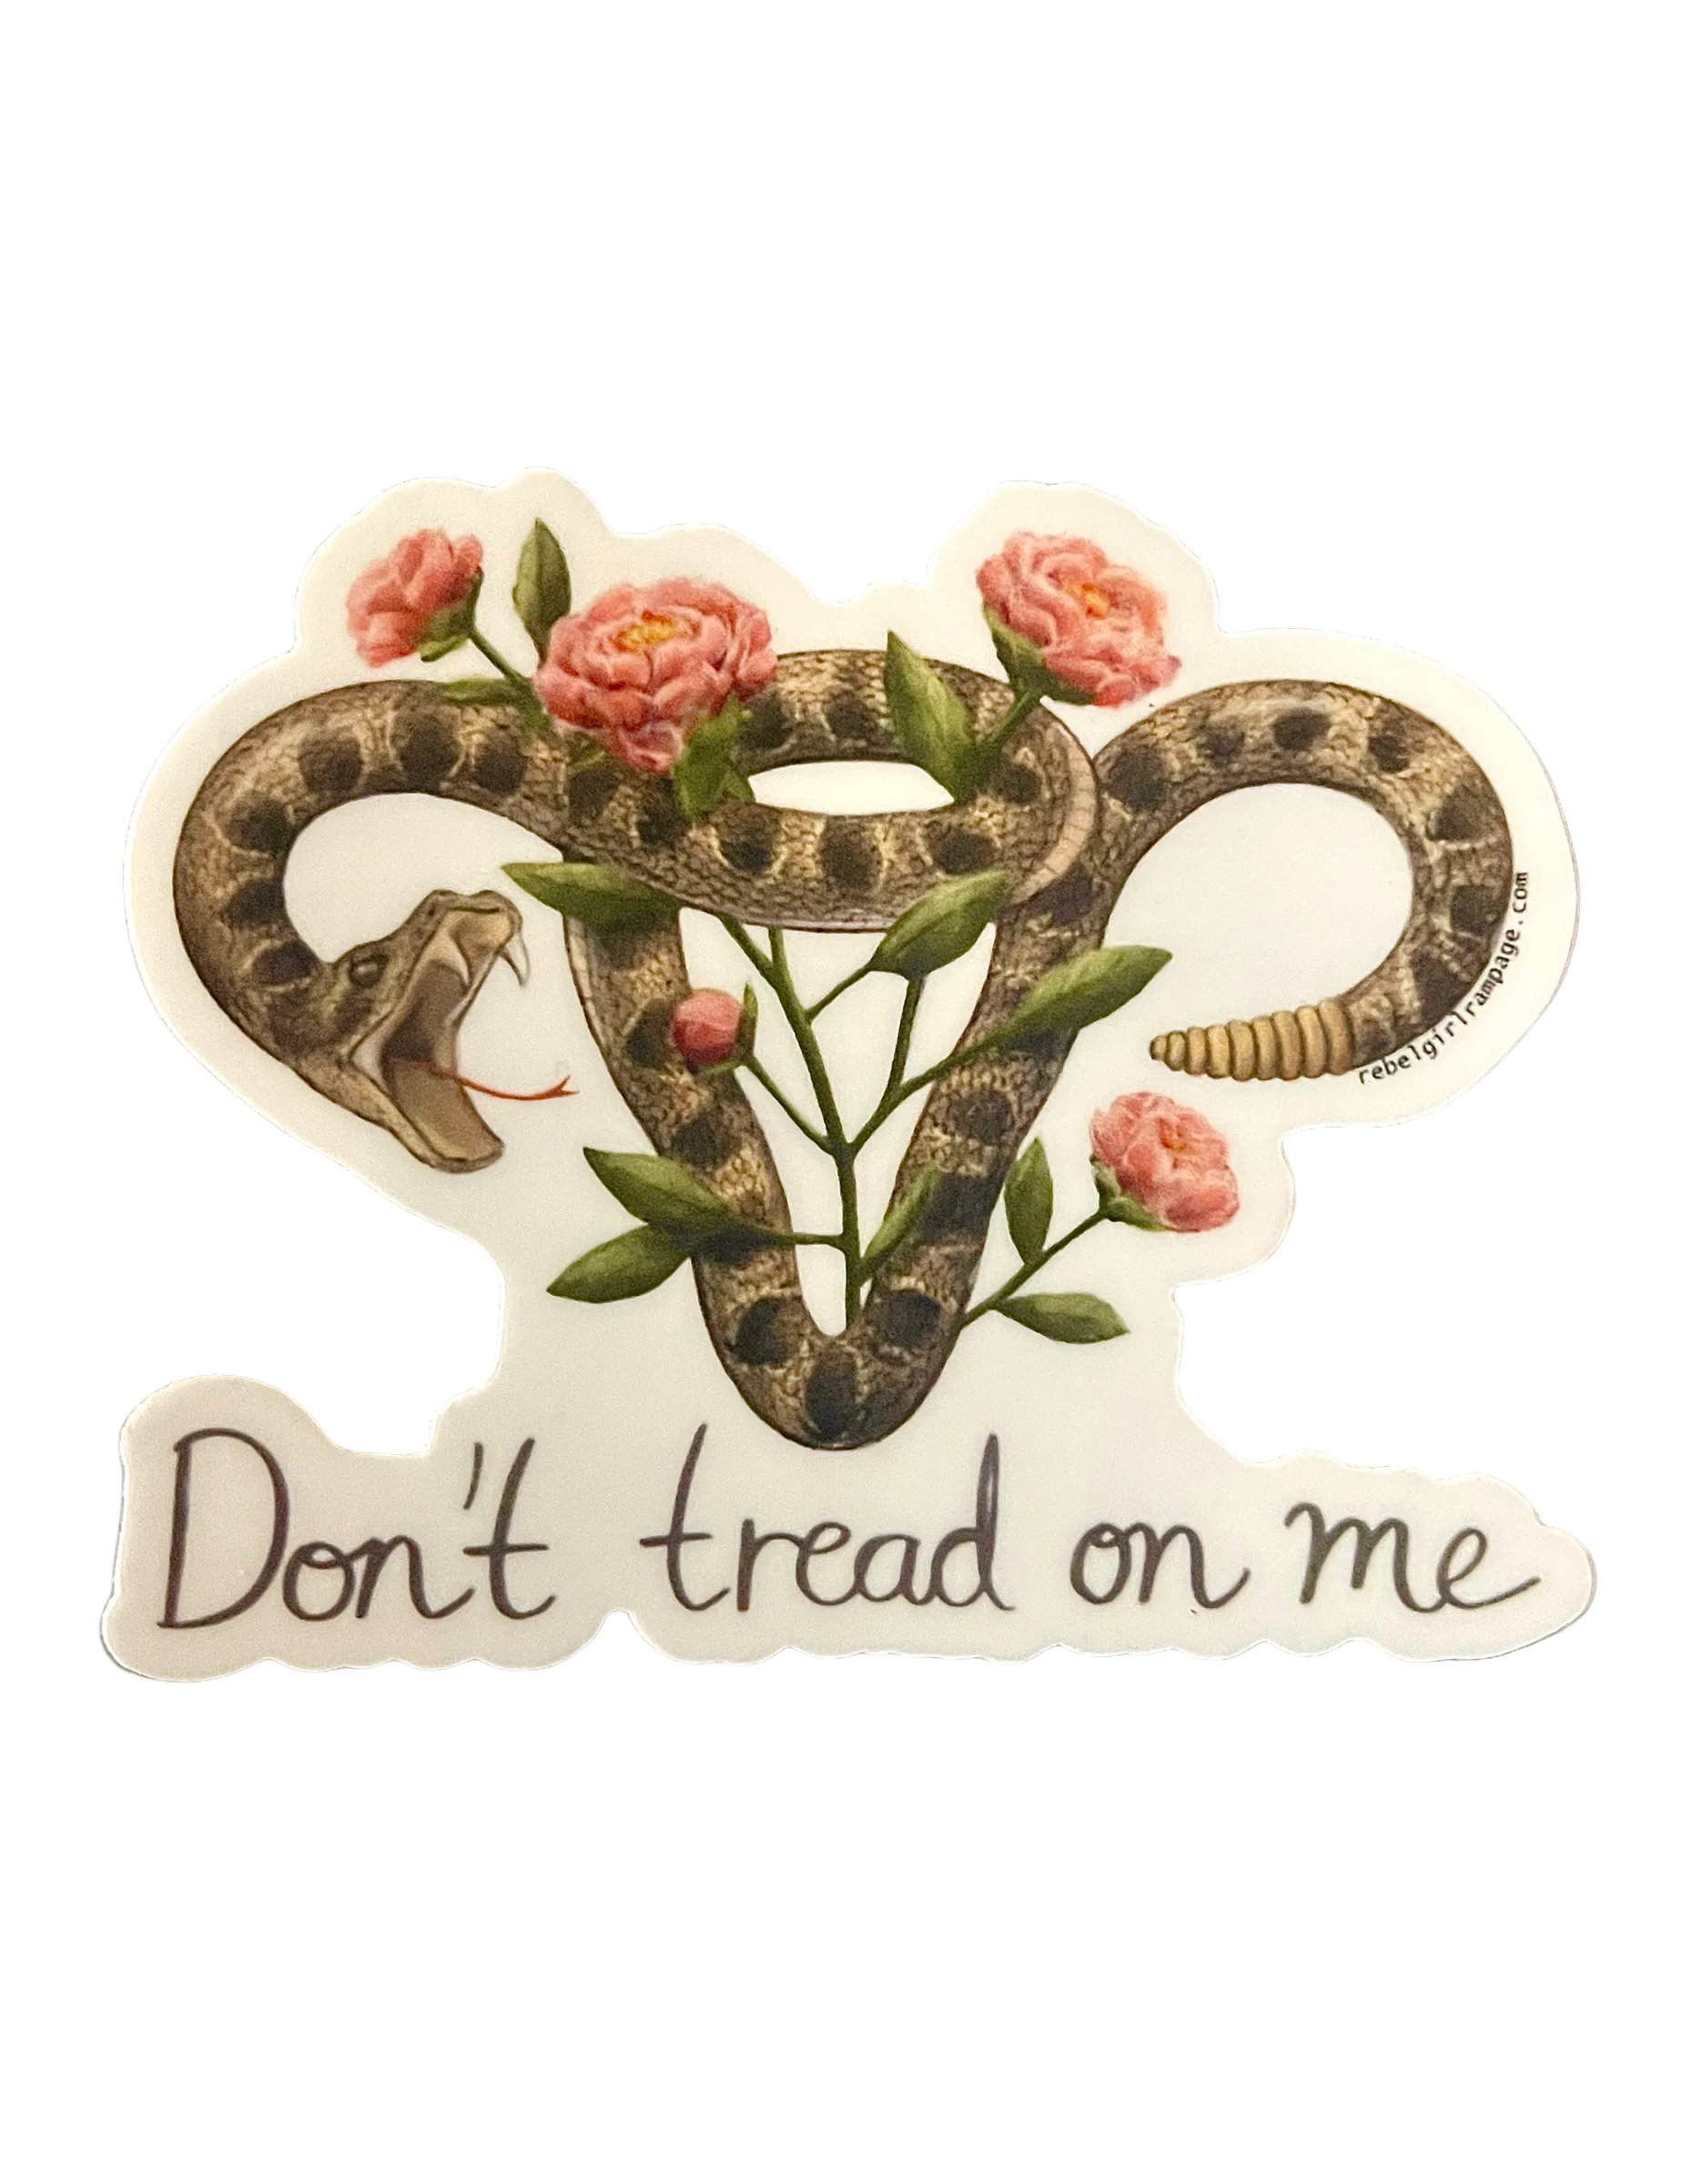 Don’t tread on me uterus with flowers die cut stickers pro choice roe v wade abortion rights planned parenthood women’s rights Rebel Girl Rampage